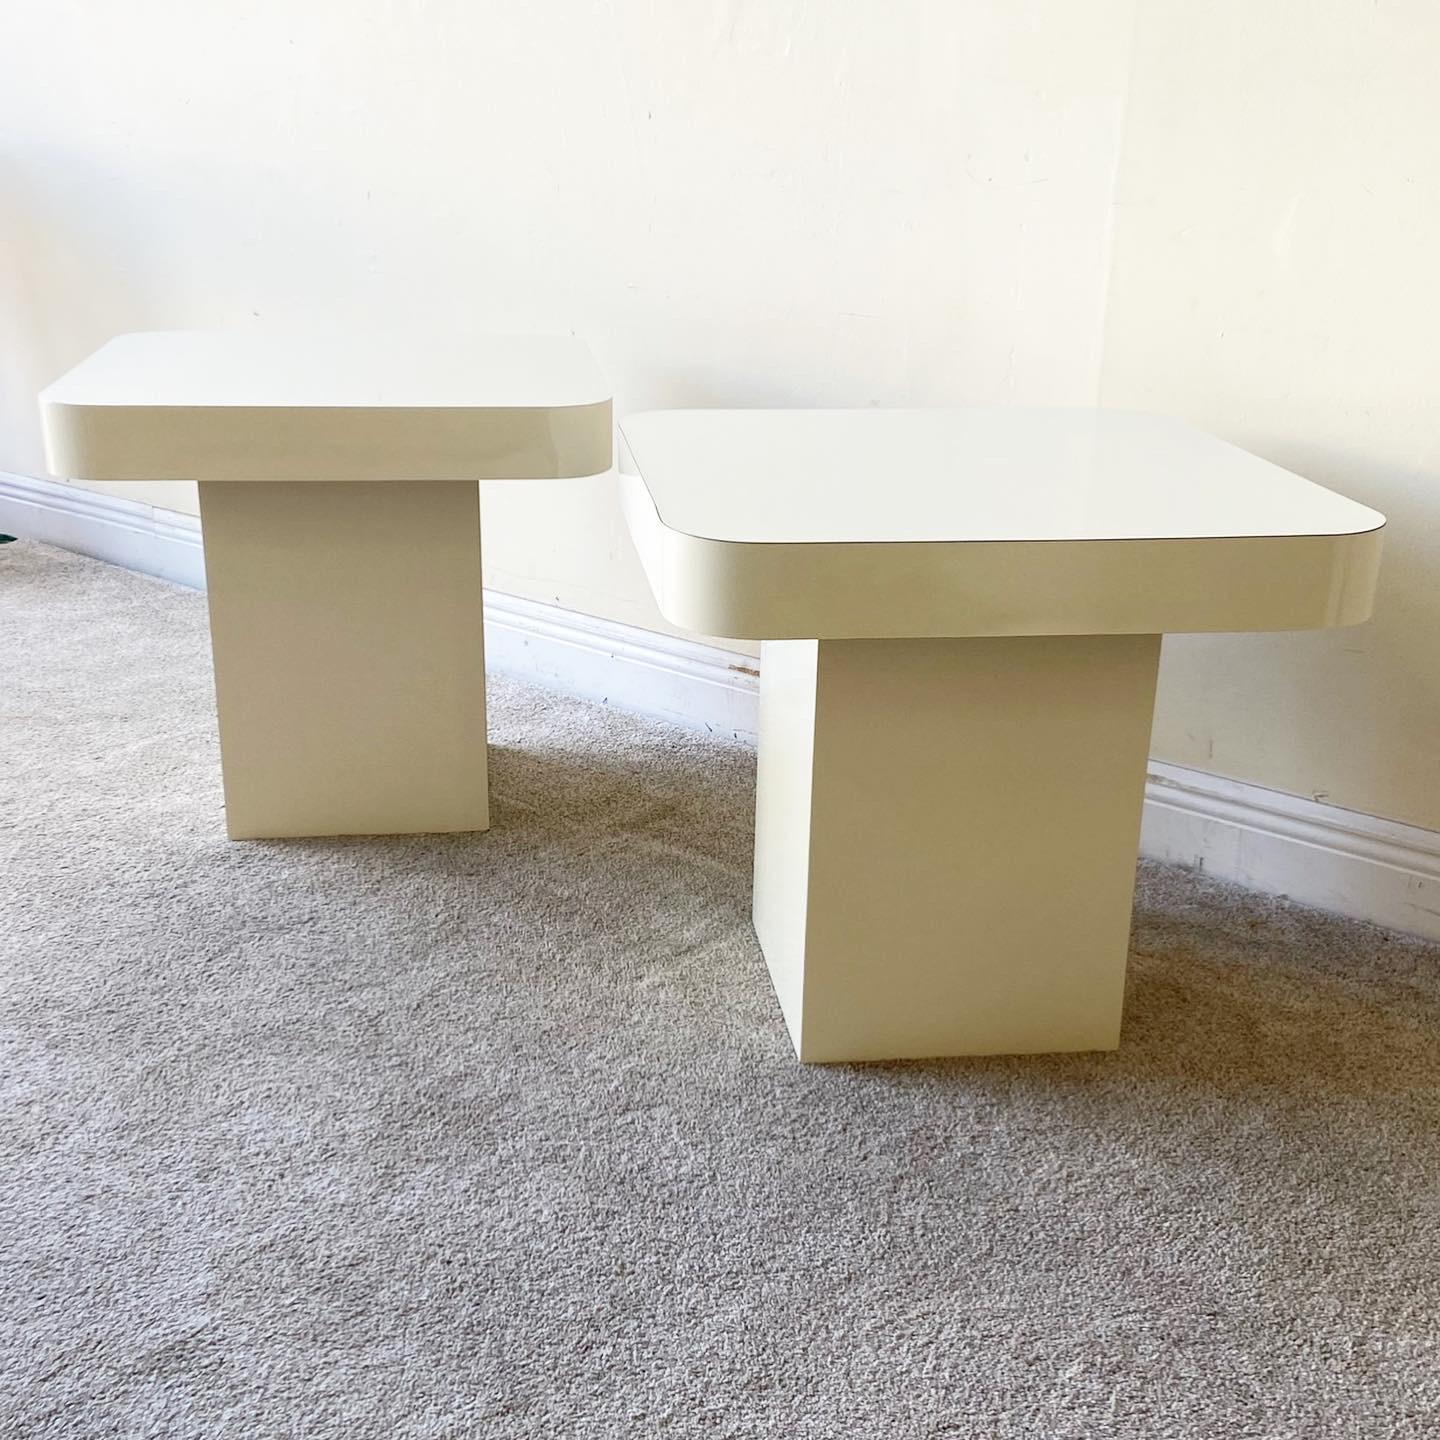 Late 20th Century Post Modern Beige Laminate Square Mushroom Side Tables - a Pair For Sale